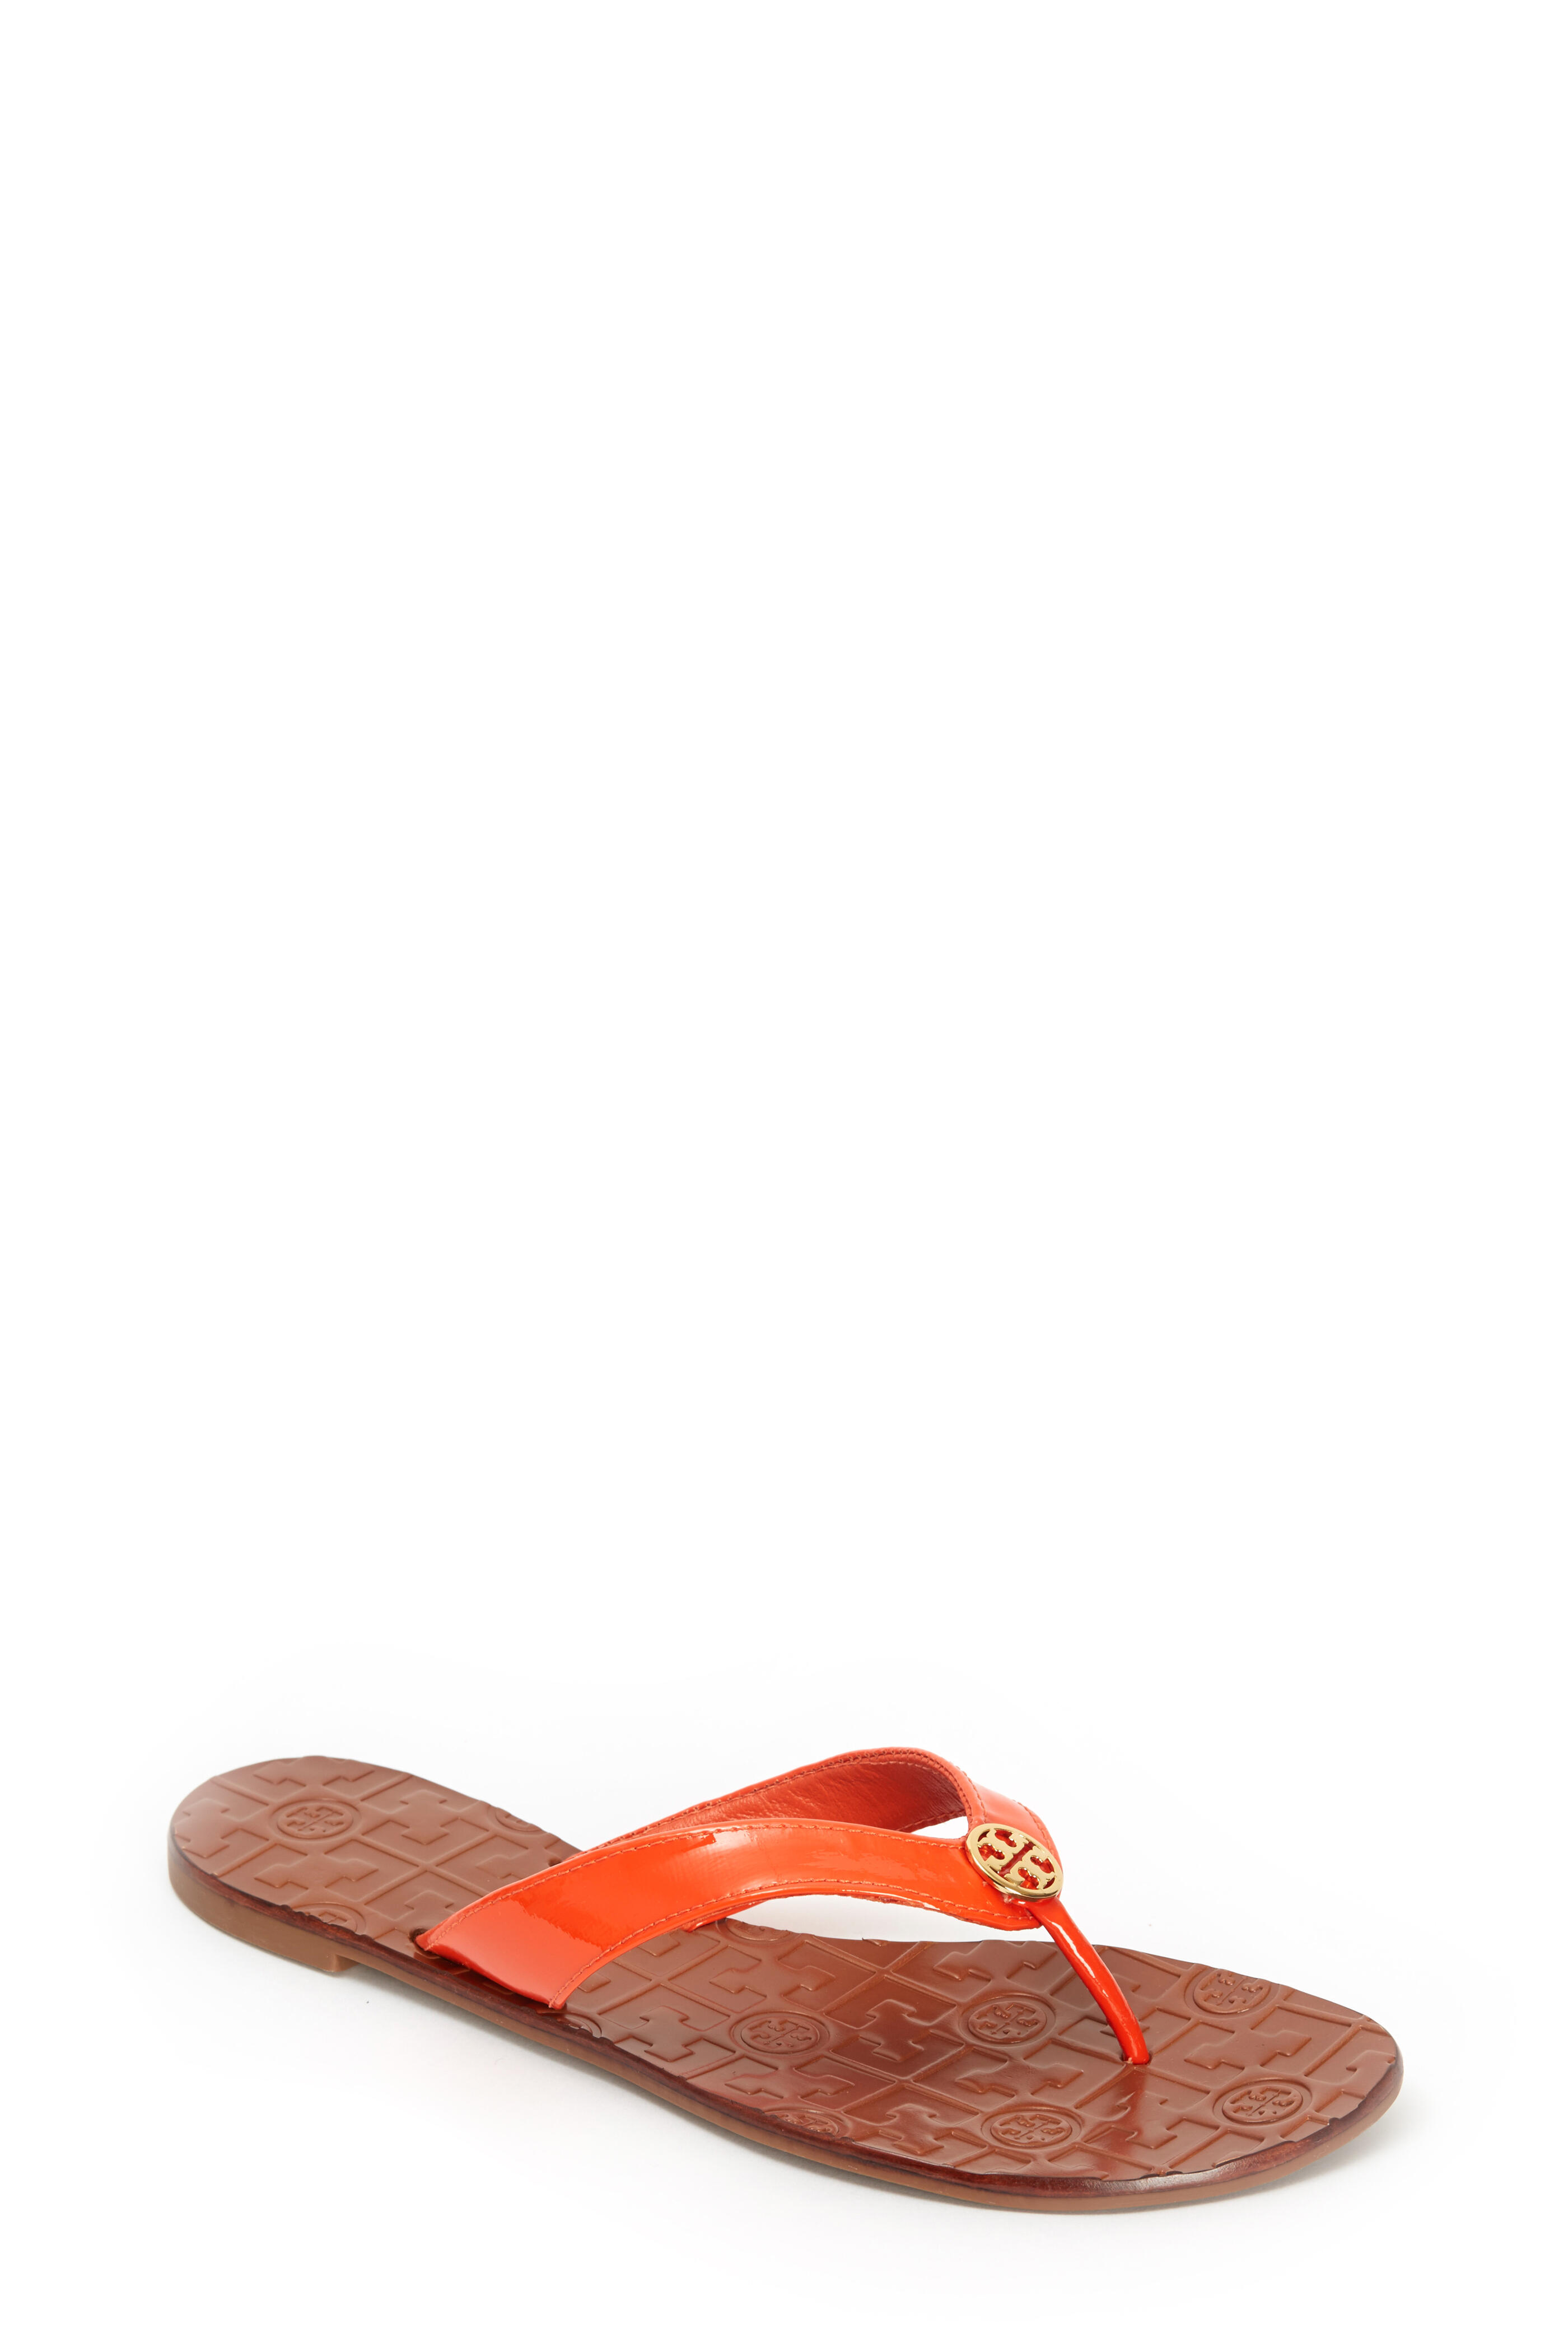 Tory Burch - Thora Coral Saffiano Sport Sandal | Mitchell Stores